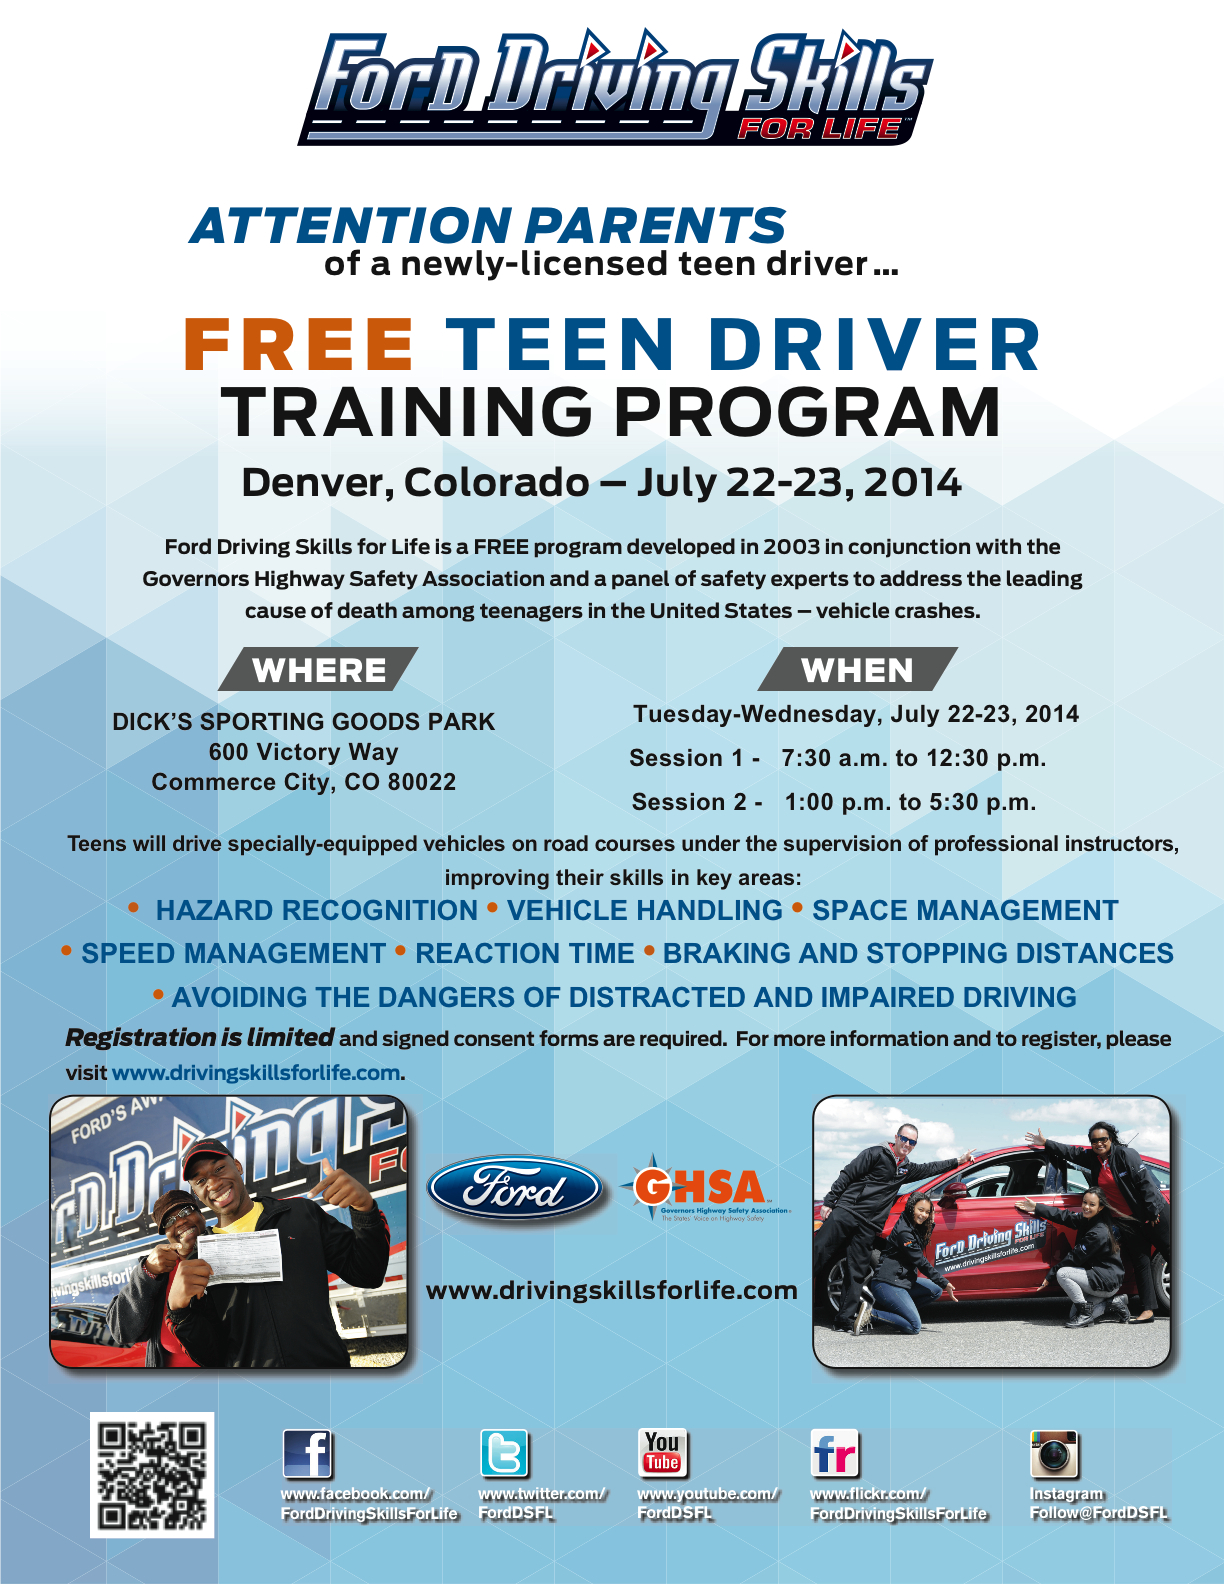 Driver Education & Traffic Safety Programs - Driving Safety